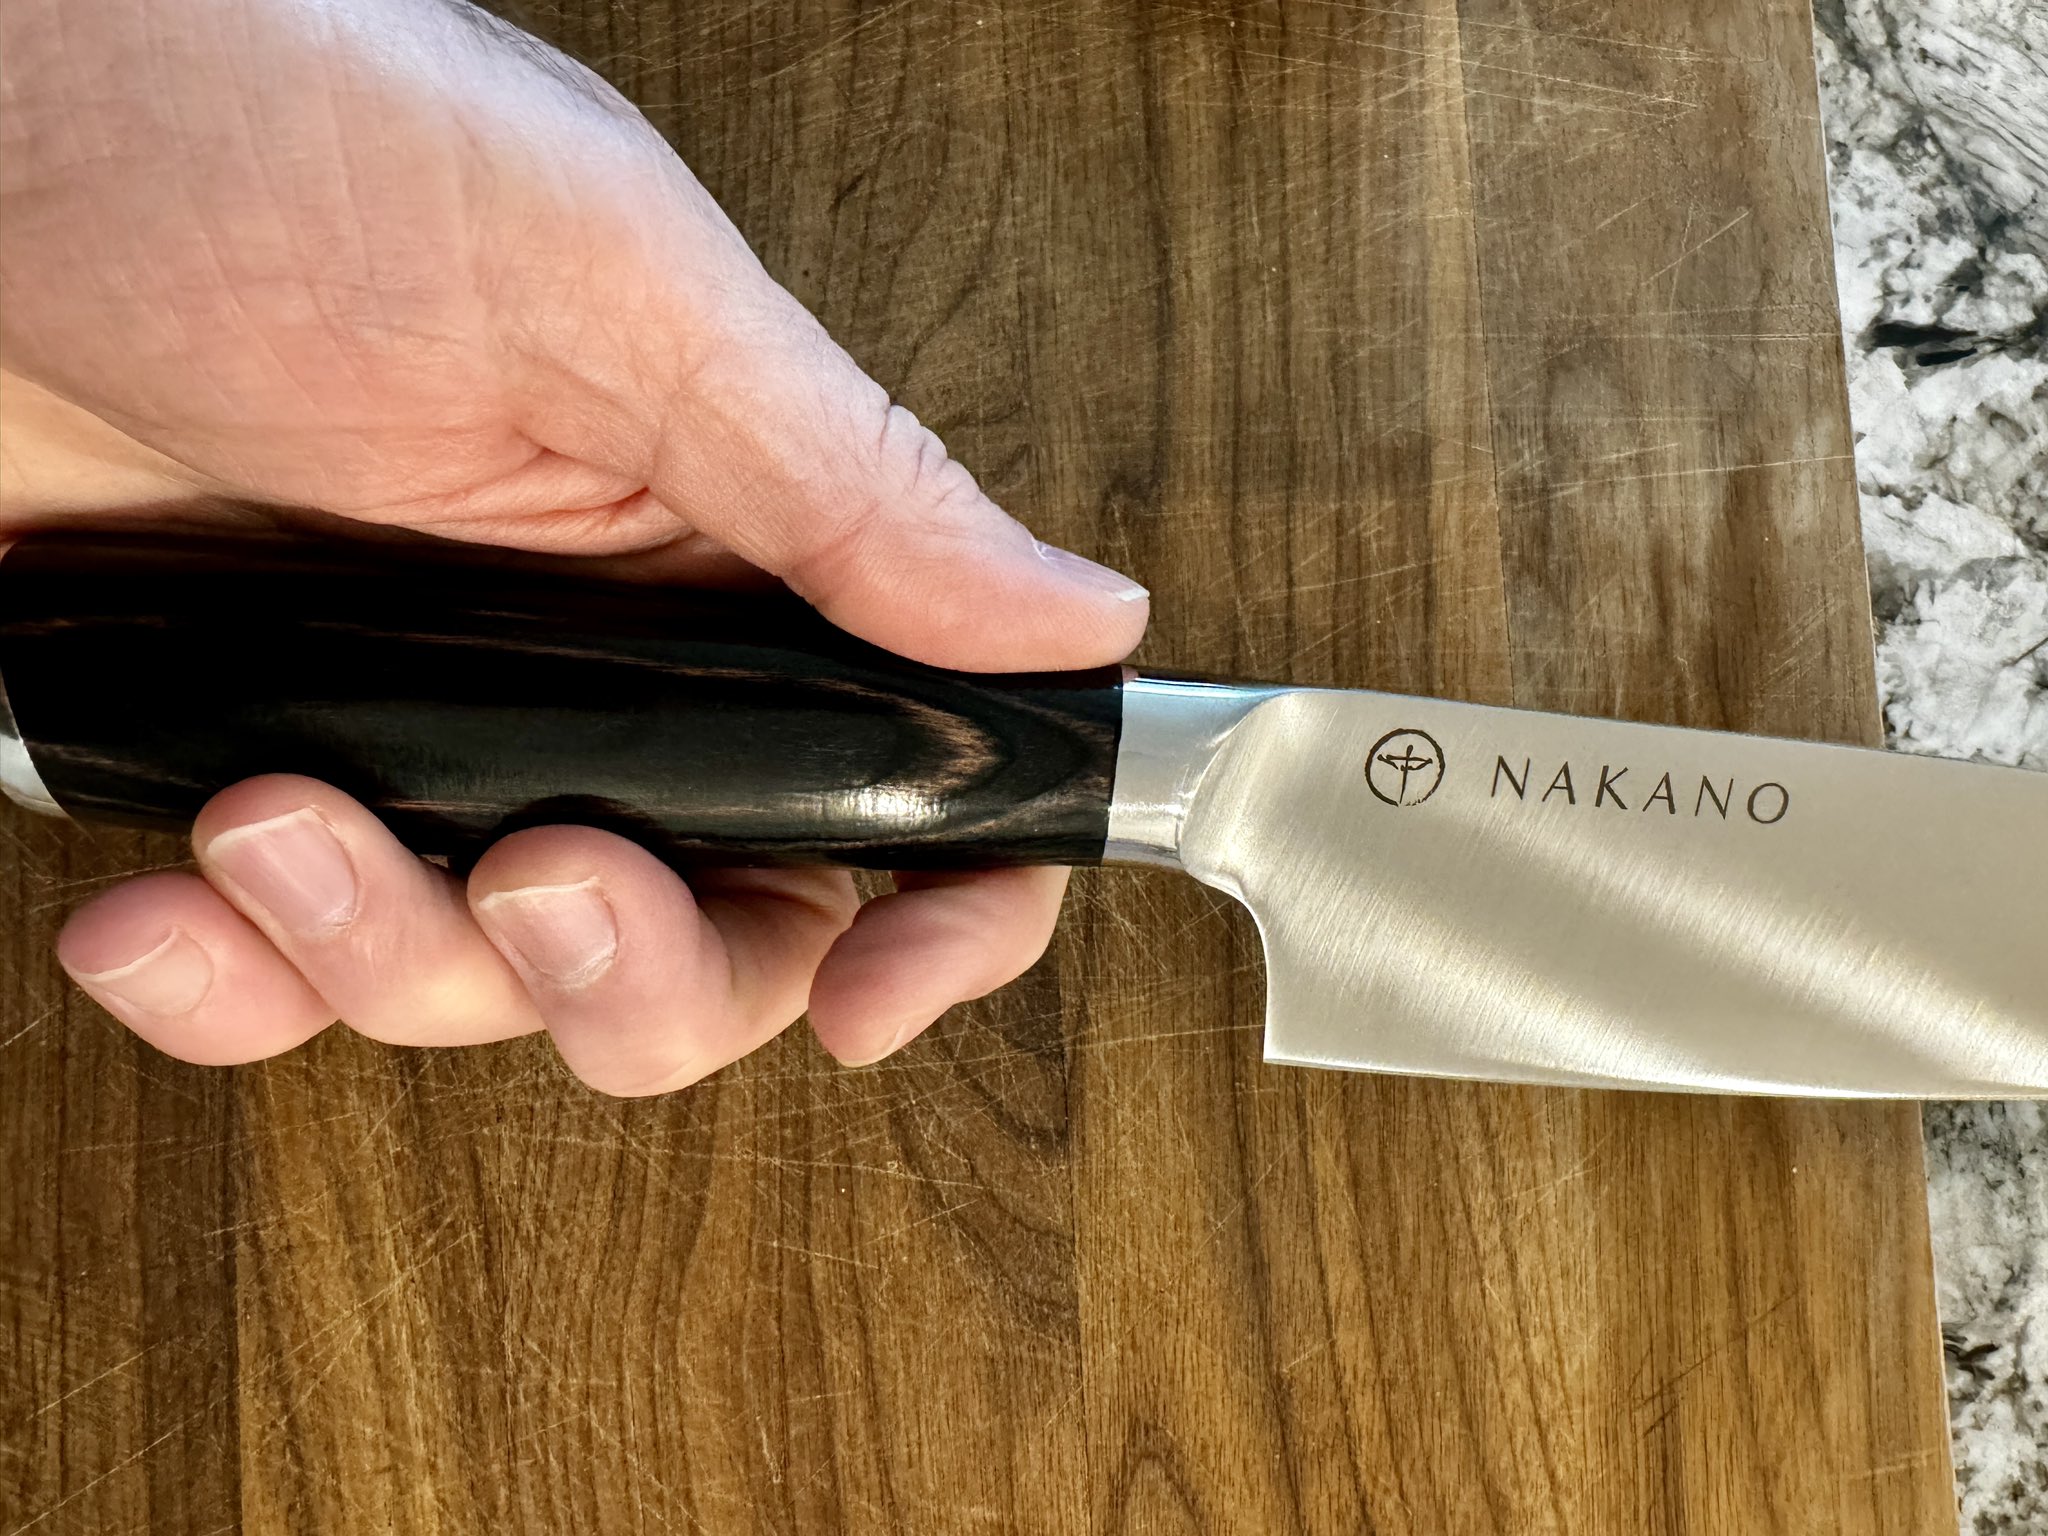 James Walker on X: I ordered a Nakano chef's knife to go with my